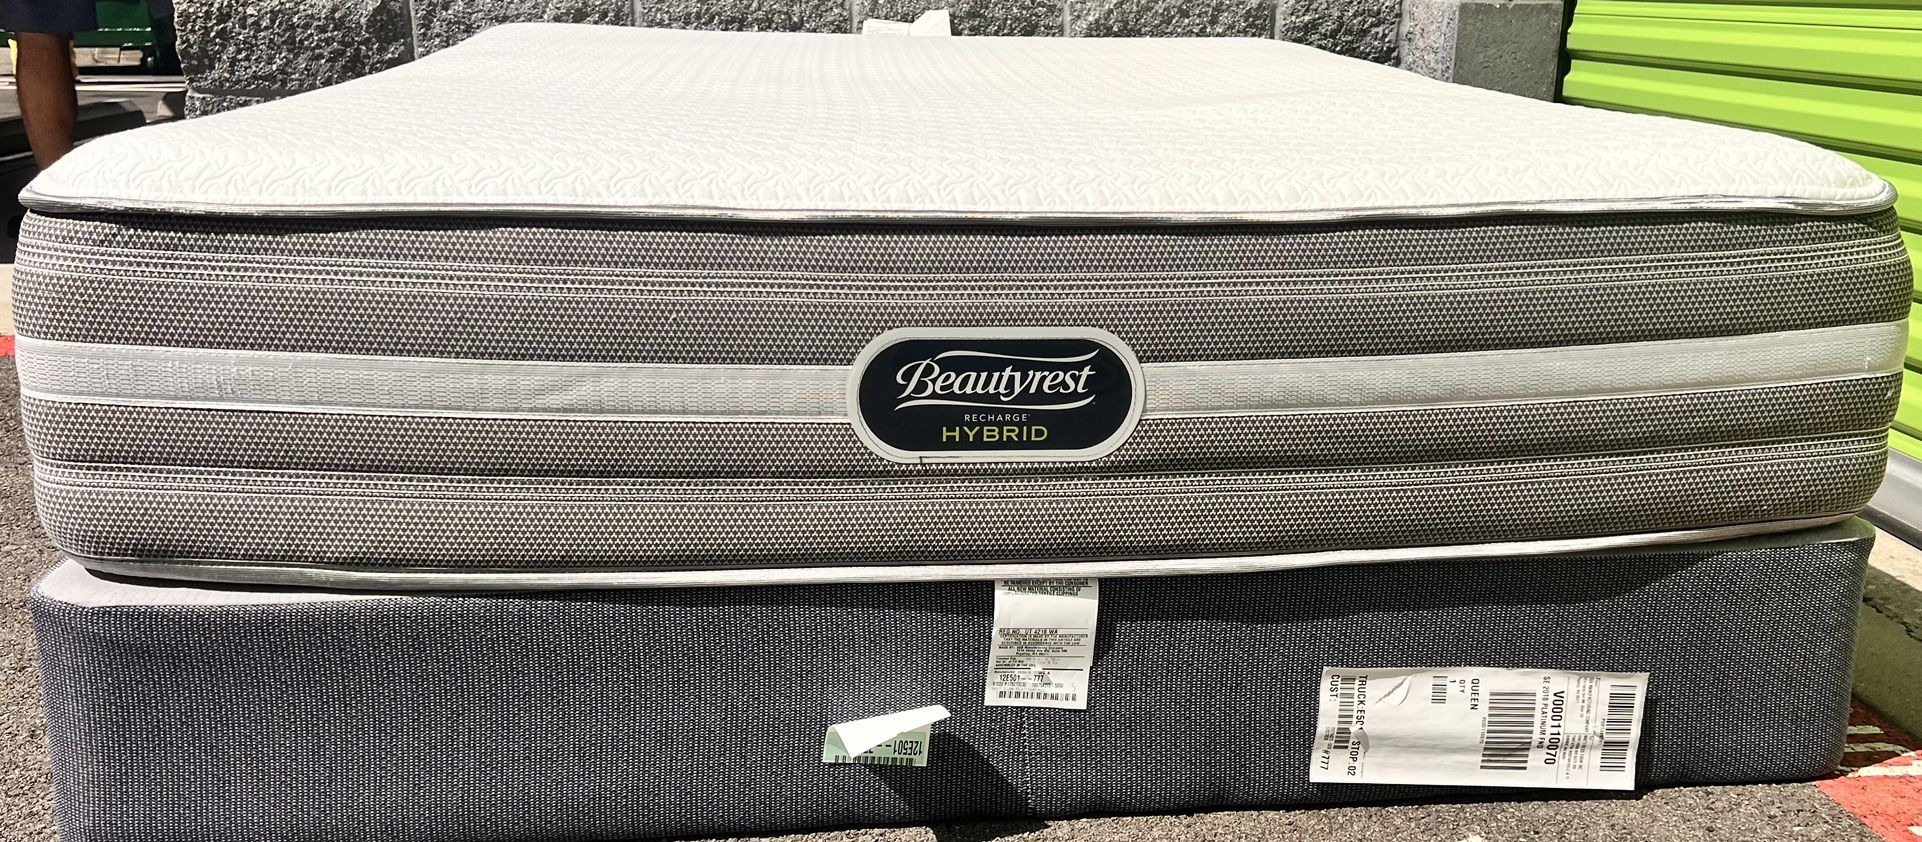 Like New Queen Size Beautyrest Mattress - Box Spring And Frame Optional